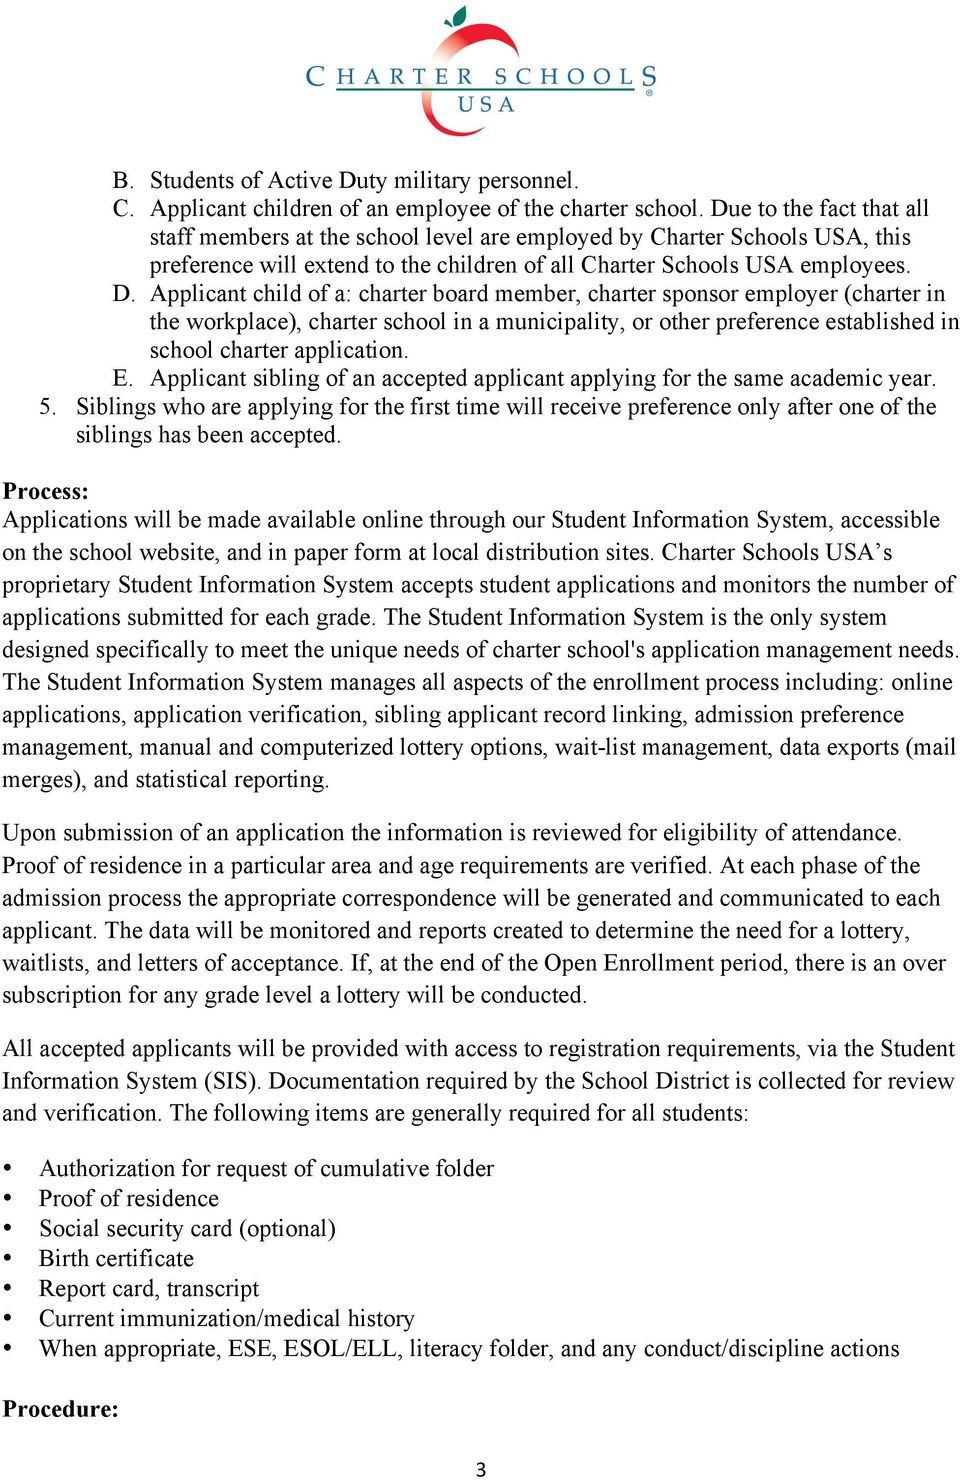 Applicant child of a: charter board member, charter sponsor employer (charter in the workplace), charter school in a municipality, or other preference established in school charter application. E.